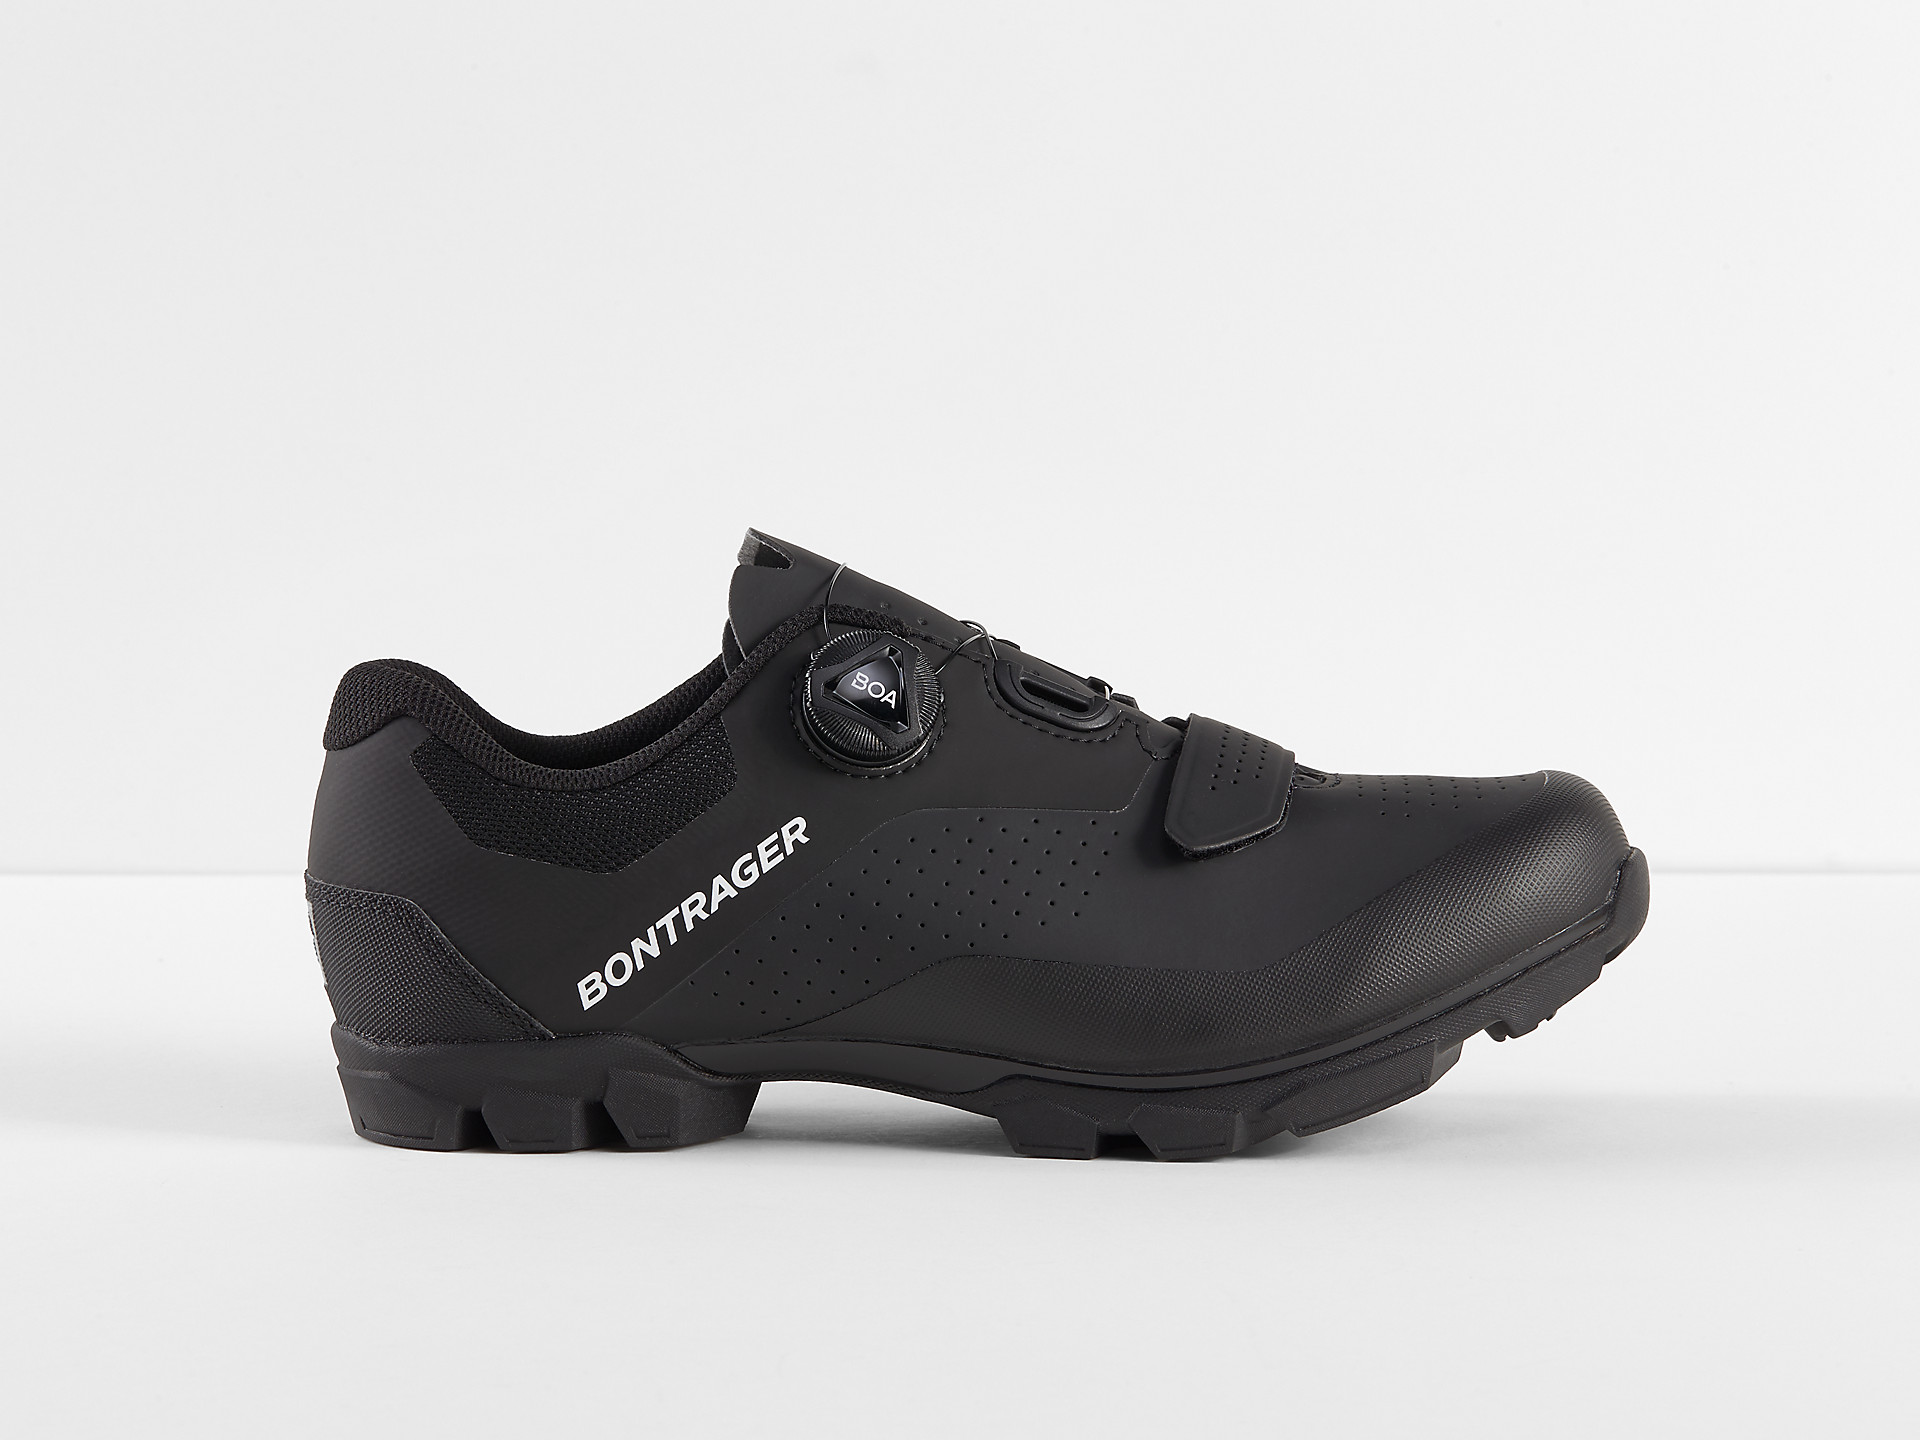 <a href="https://cycles-clement.be/product/bont-chaussures-foray-vtt-46-black/">BONT CHAUSSURES FORAY VTT 46 BLACK</a>